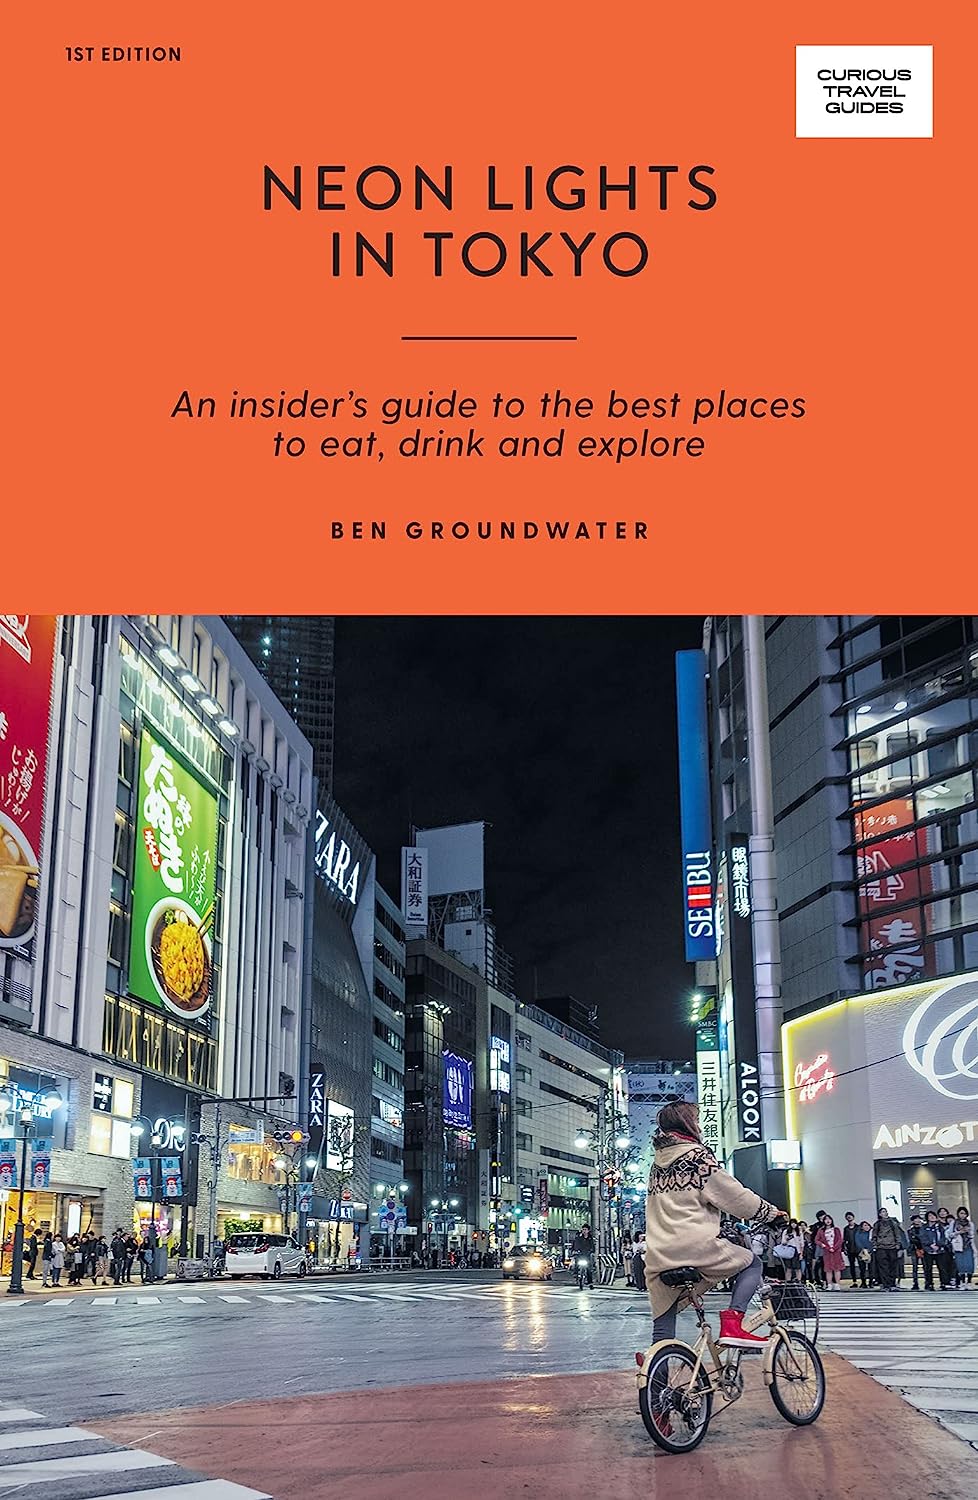 Neon Lights in Tokyo: An Insider's Guide to the Best Places to Eat, Drink and Explore